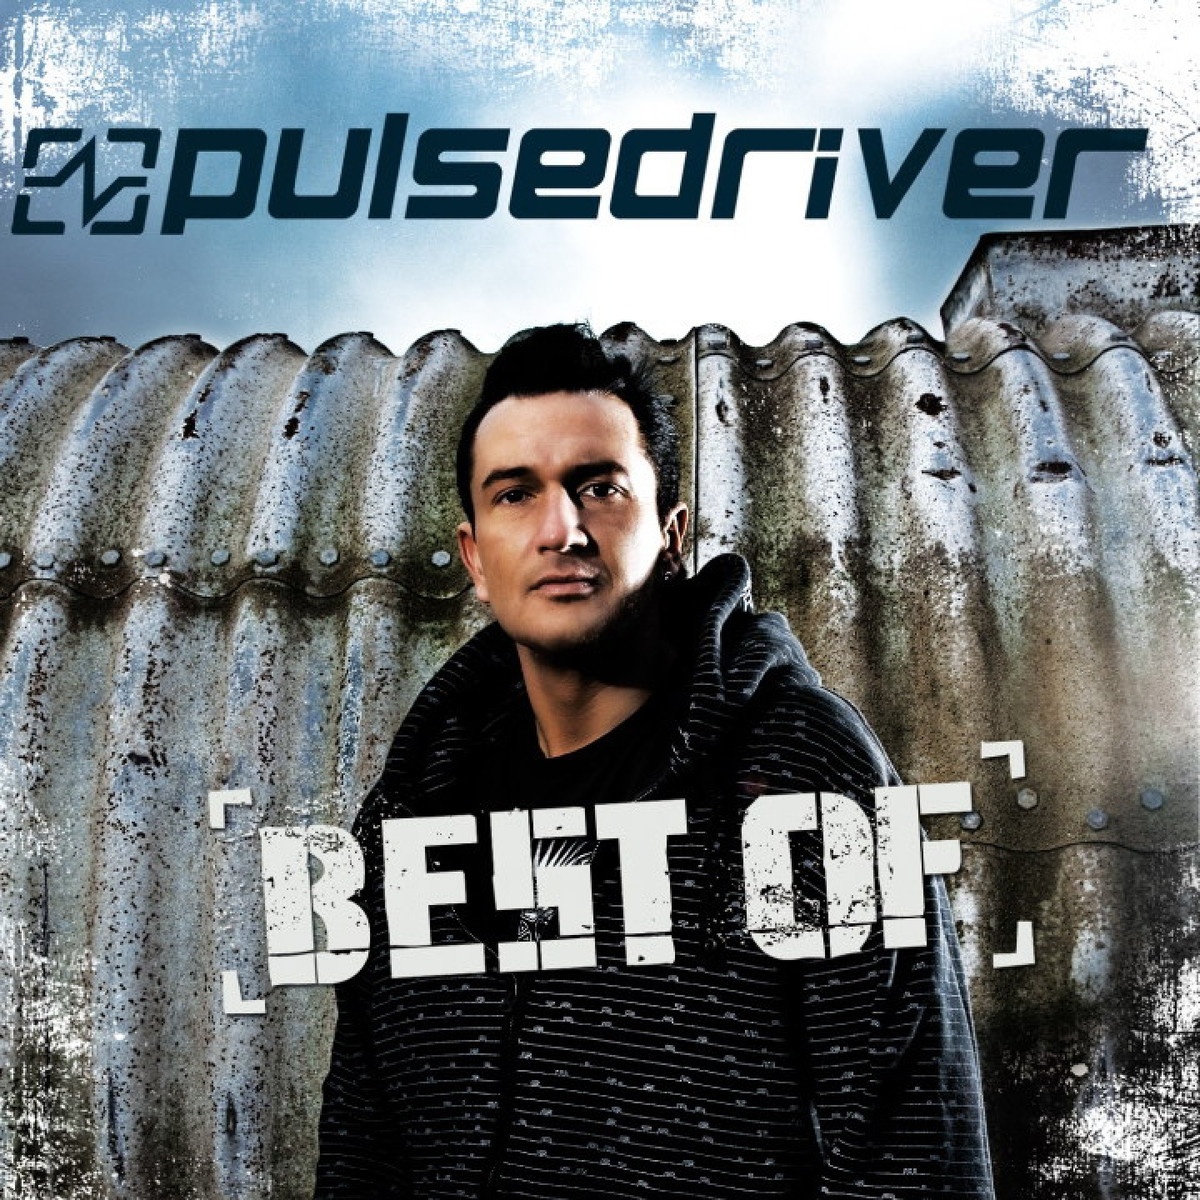 Best Of Pulsedriver